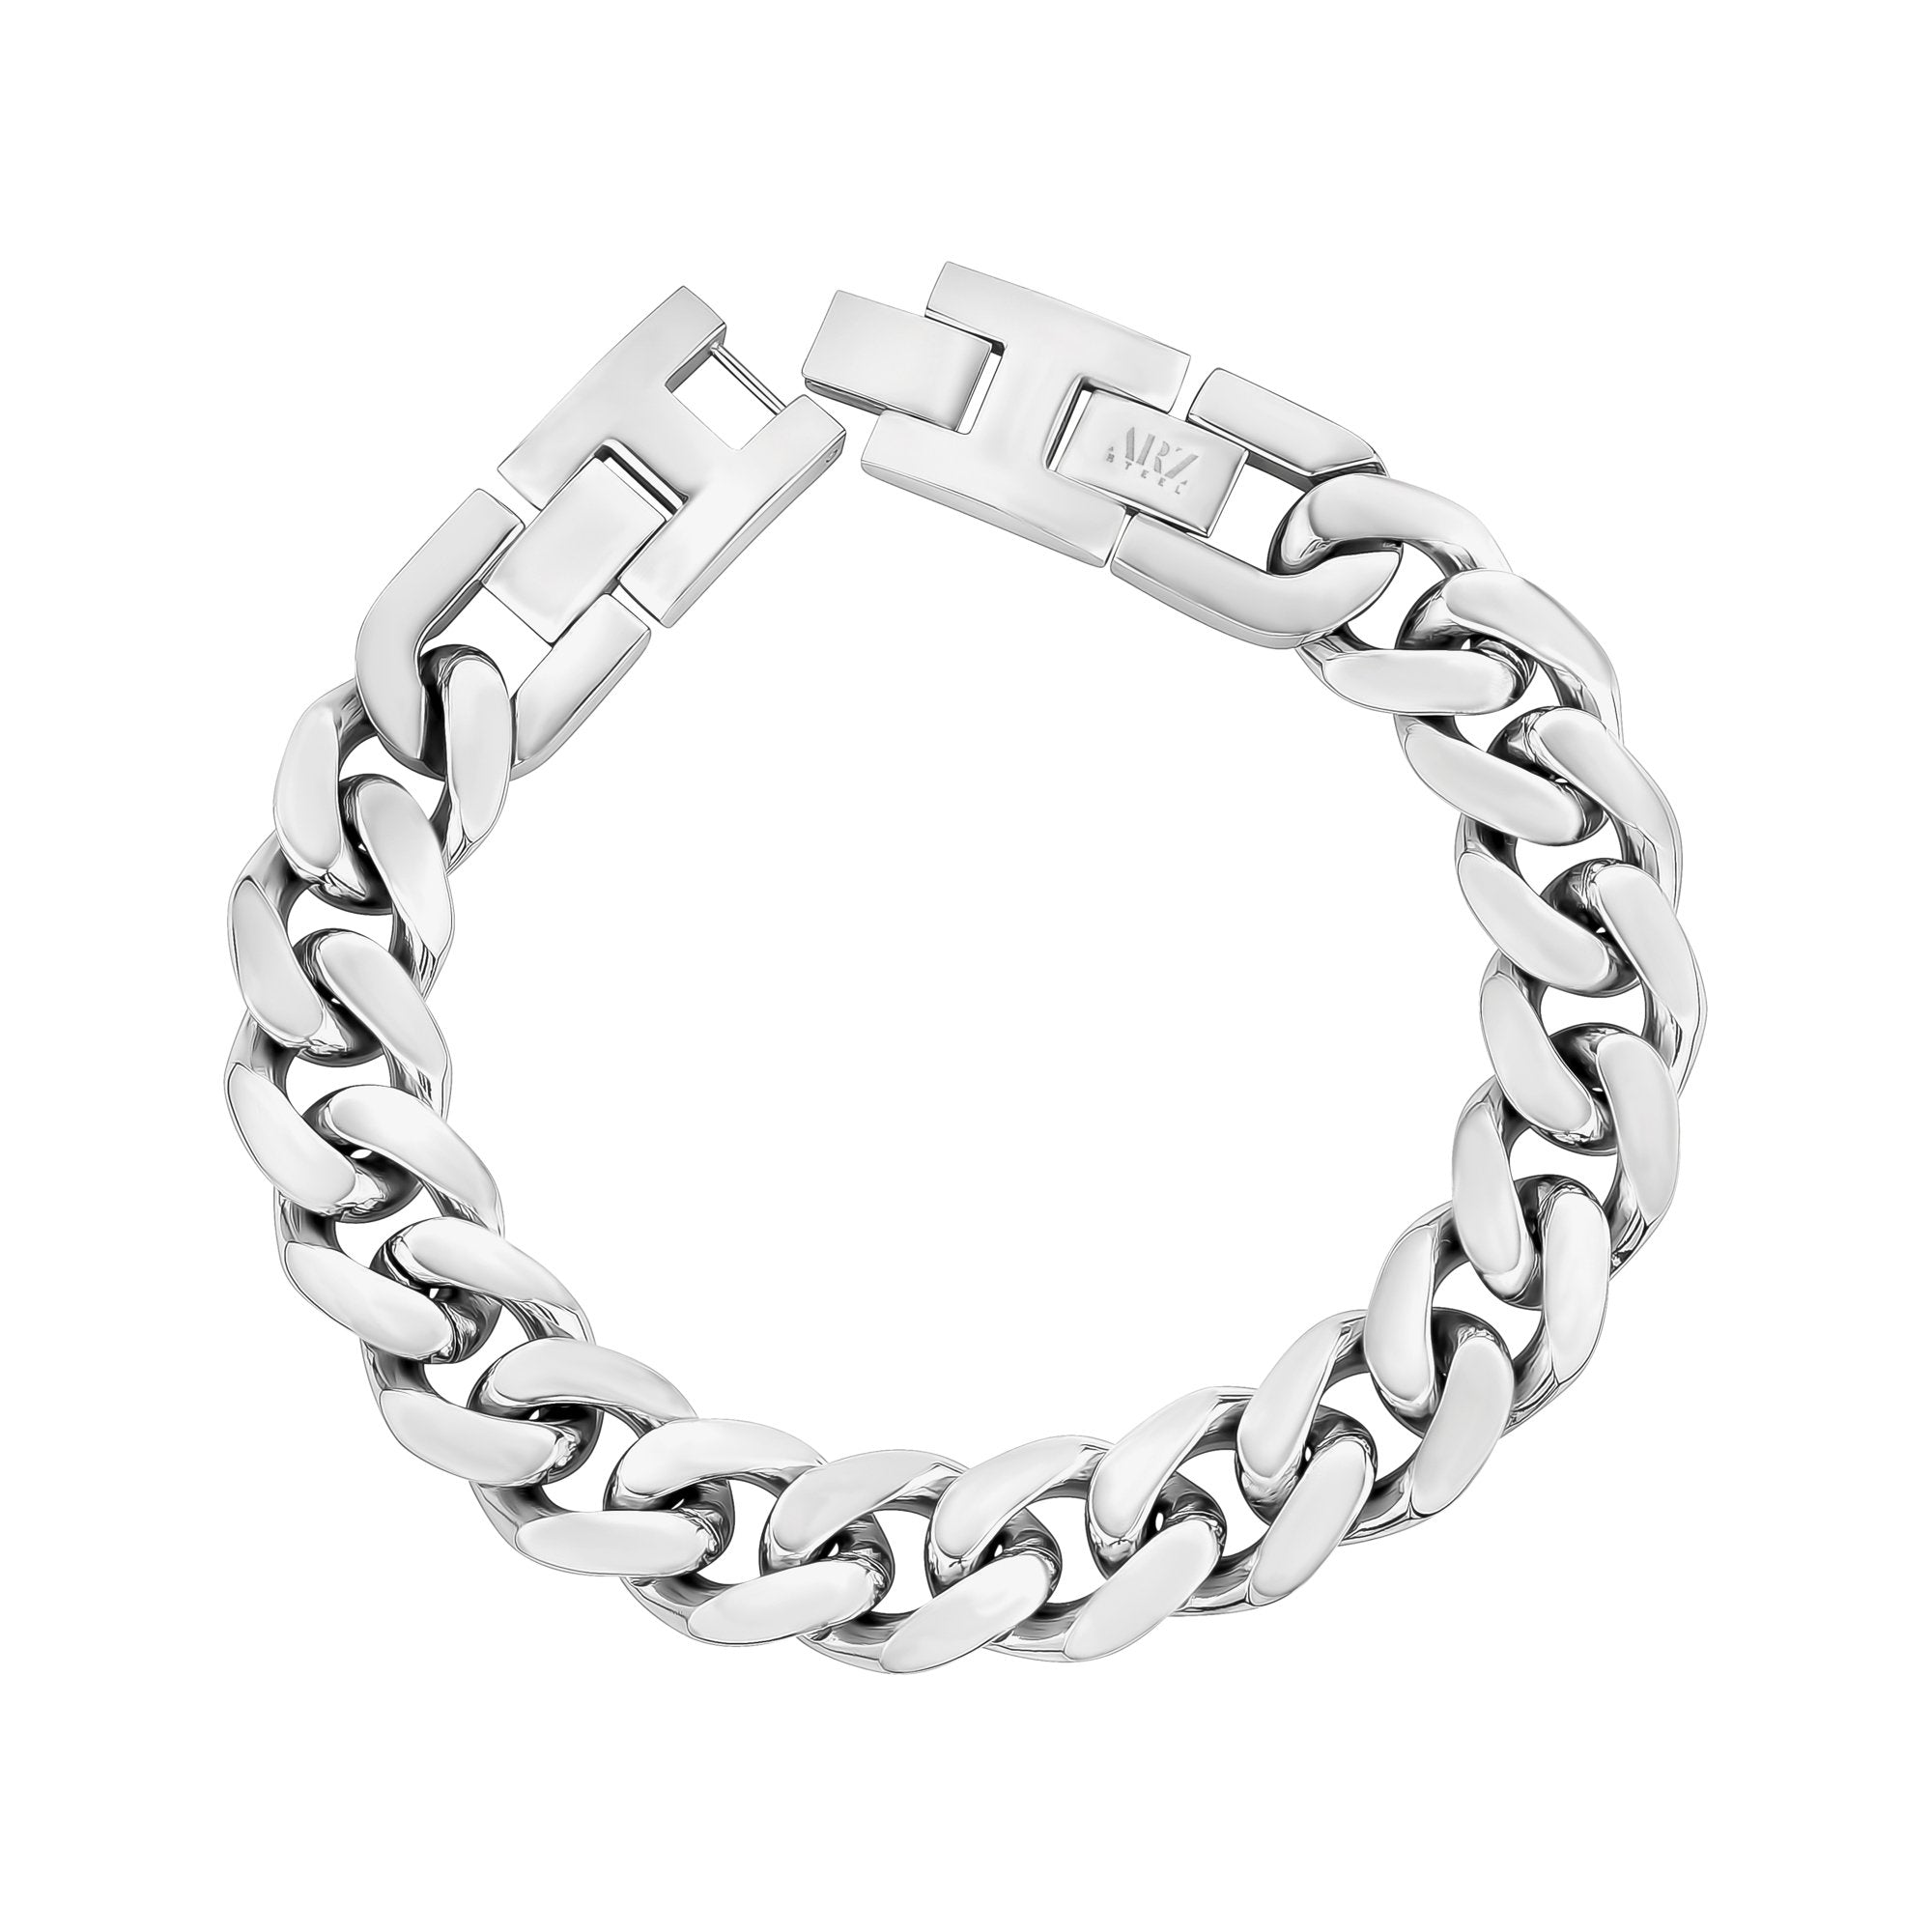 4mm Silver Bracelet for Men, Silver Franco Chain, Proclamation Jewelry